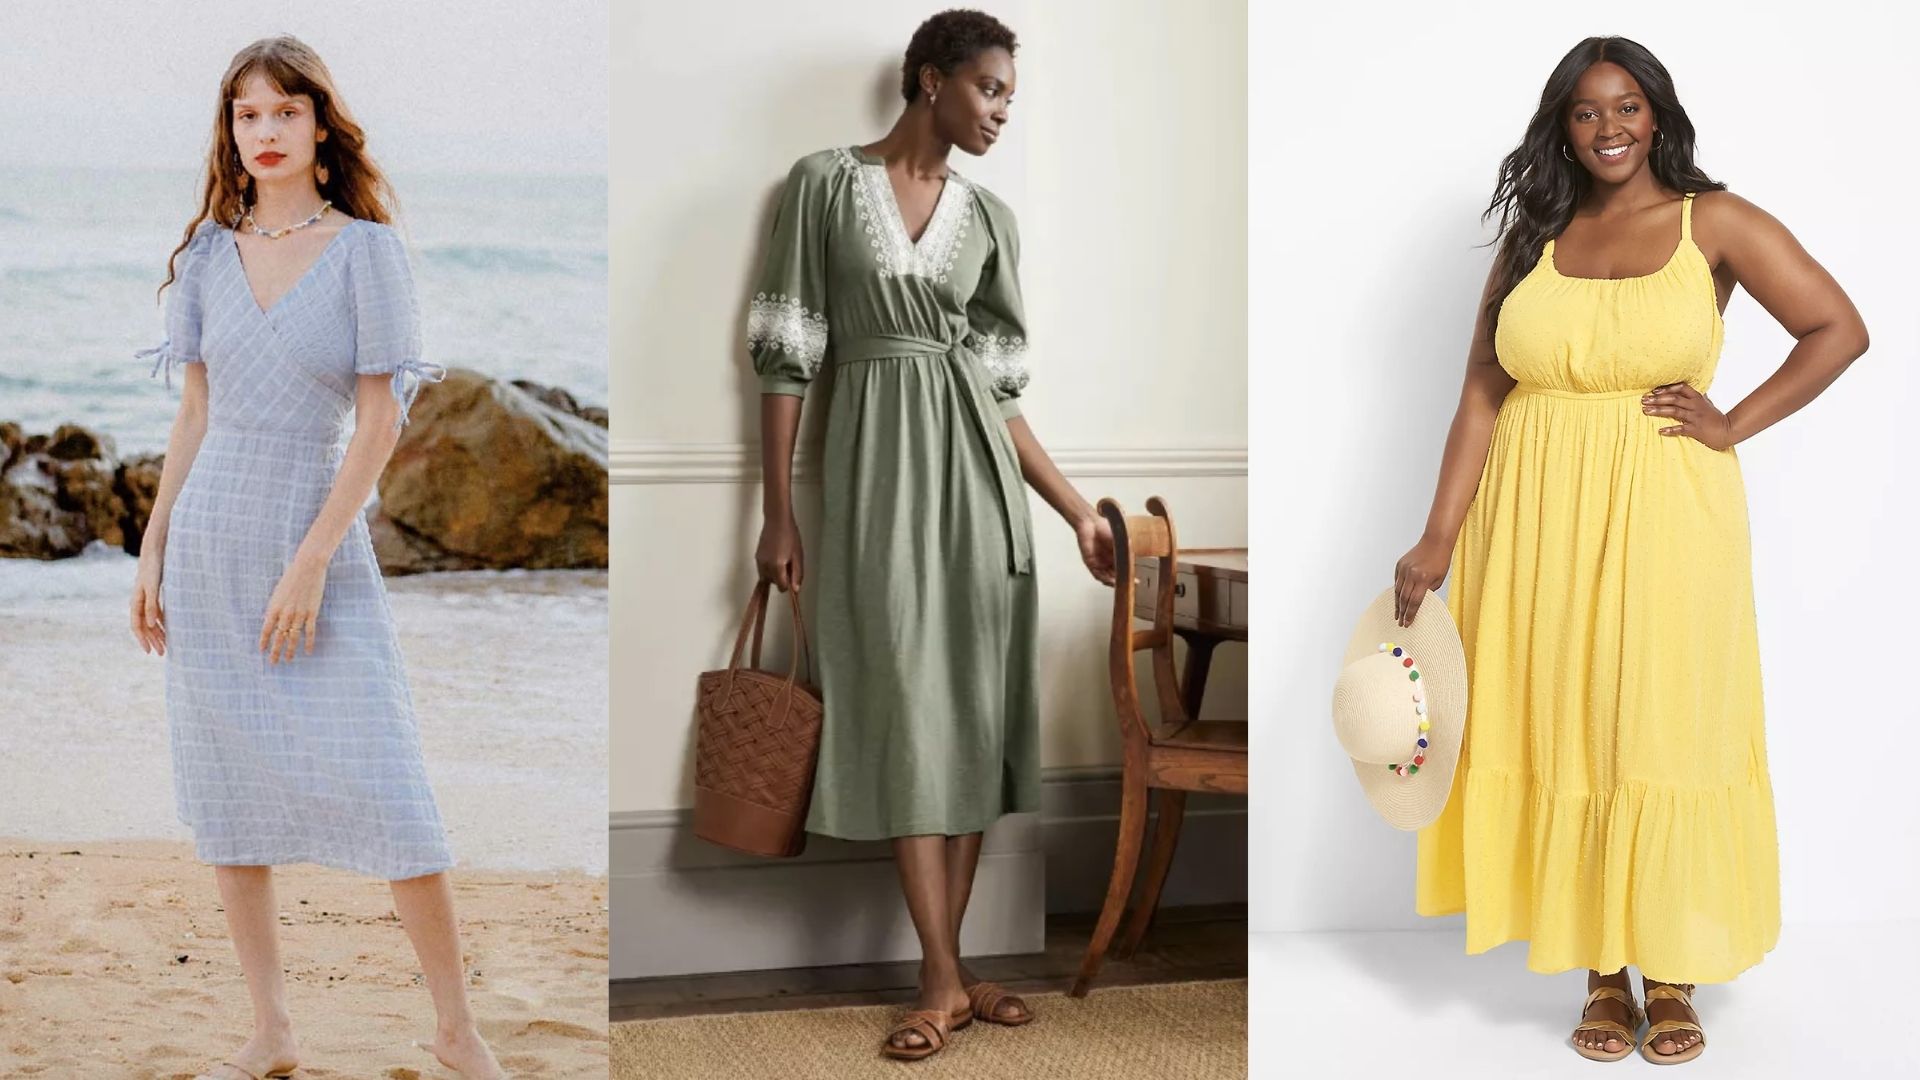 The 9 Best Dresses for Petites